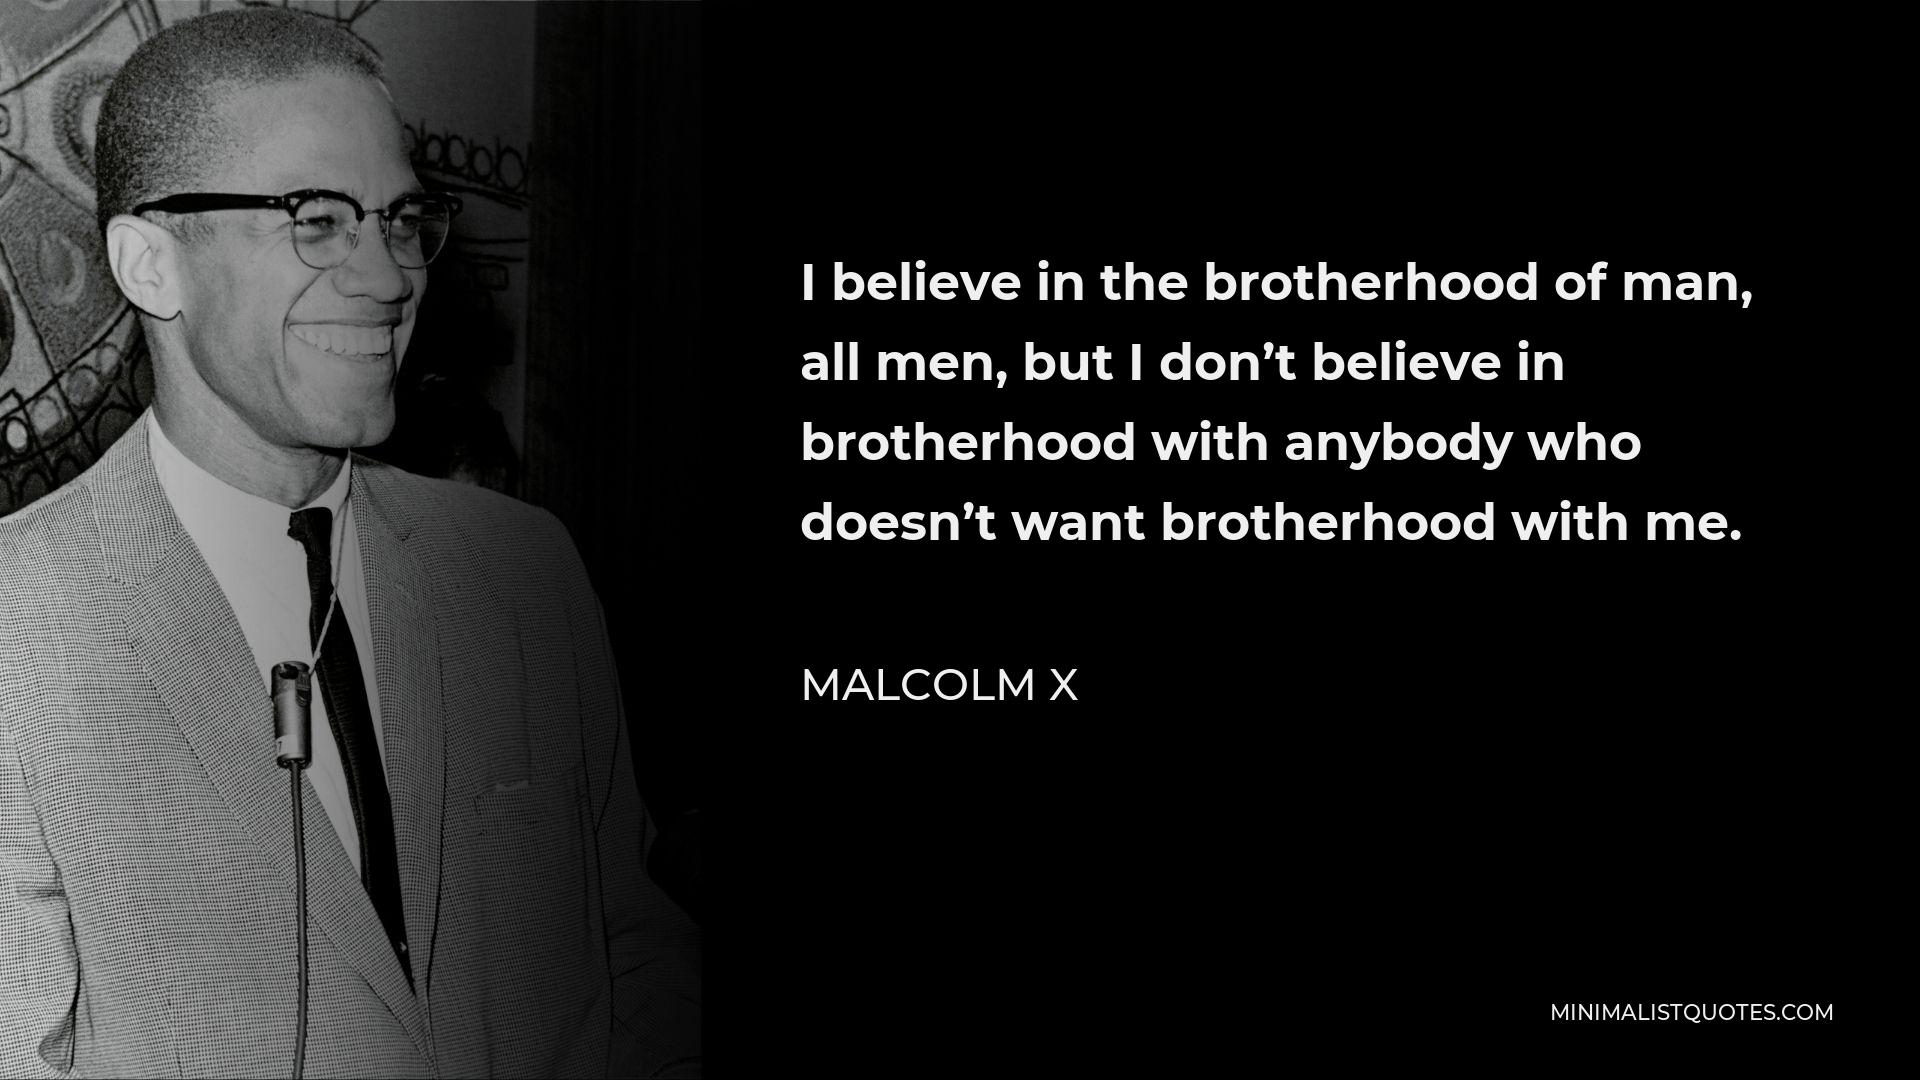 Malcolm X Quote - I believe in the brotherhood of man, all men, but I don’t believe in brotherhood with anybody who doesn’t want brotherhood with me.